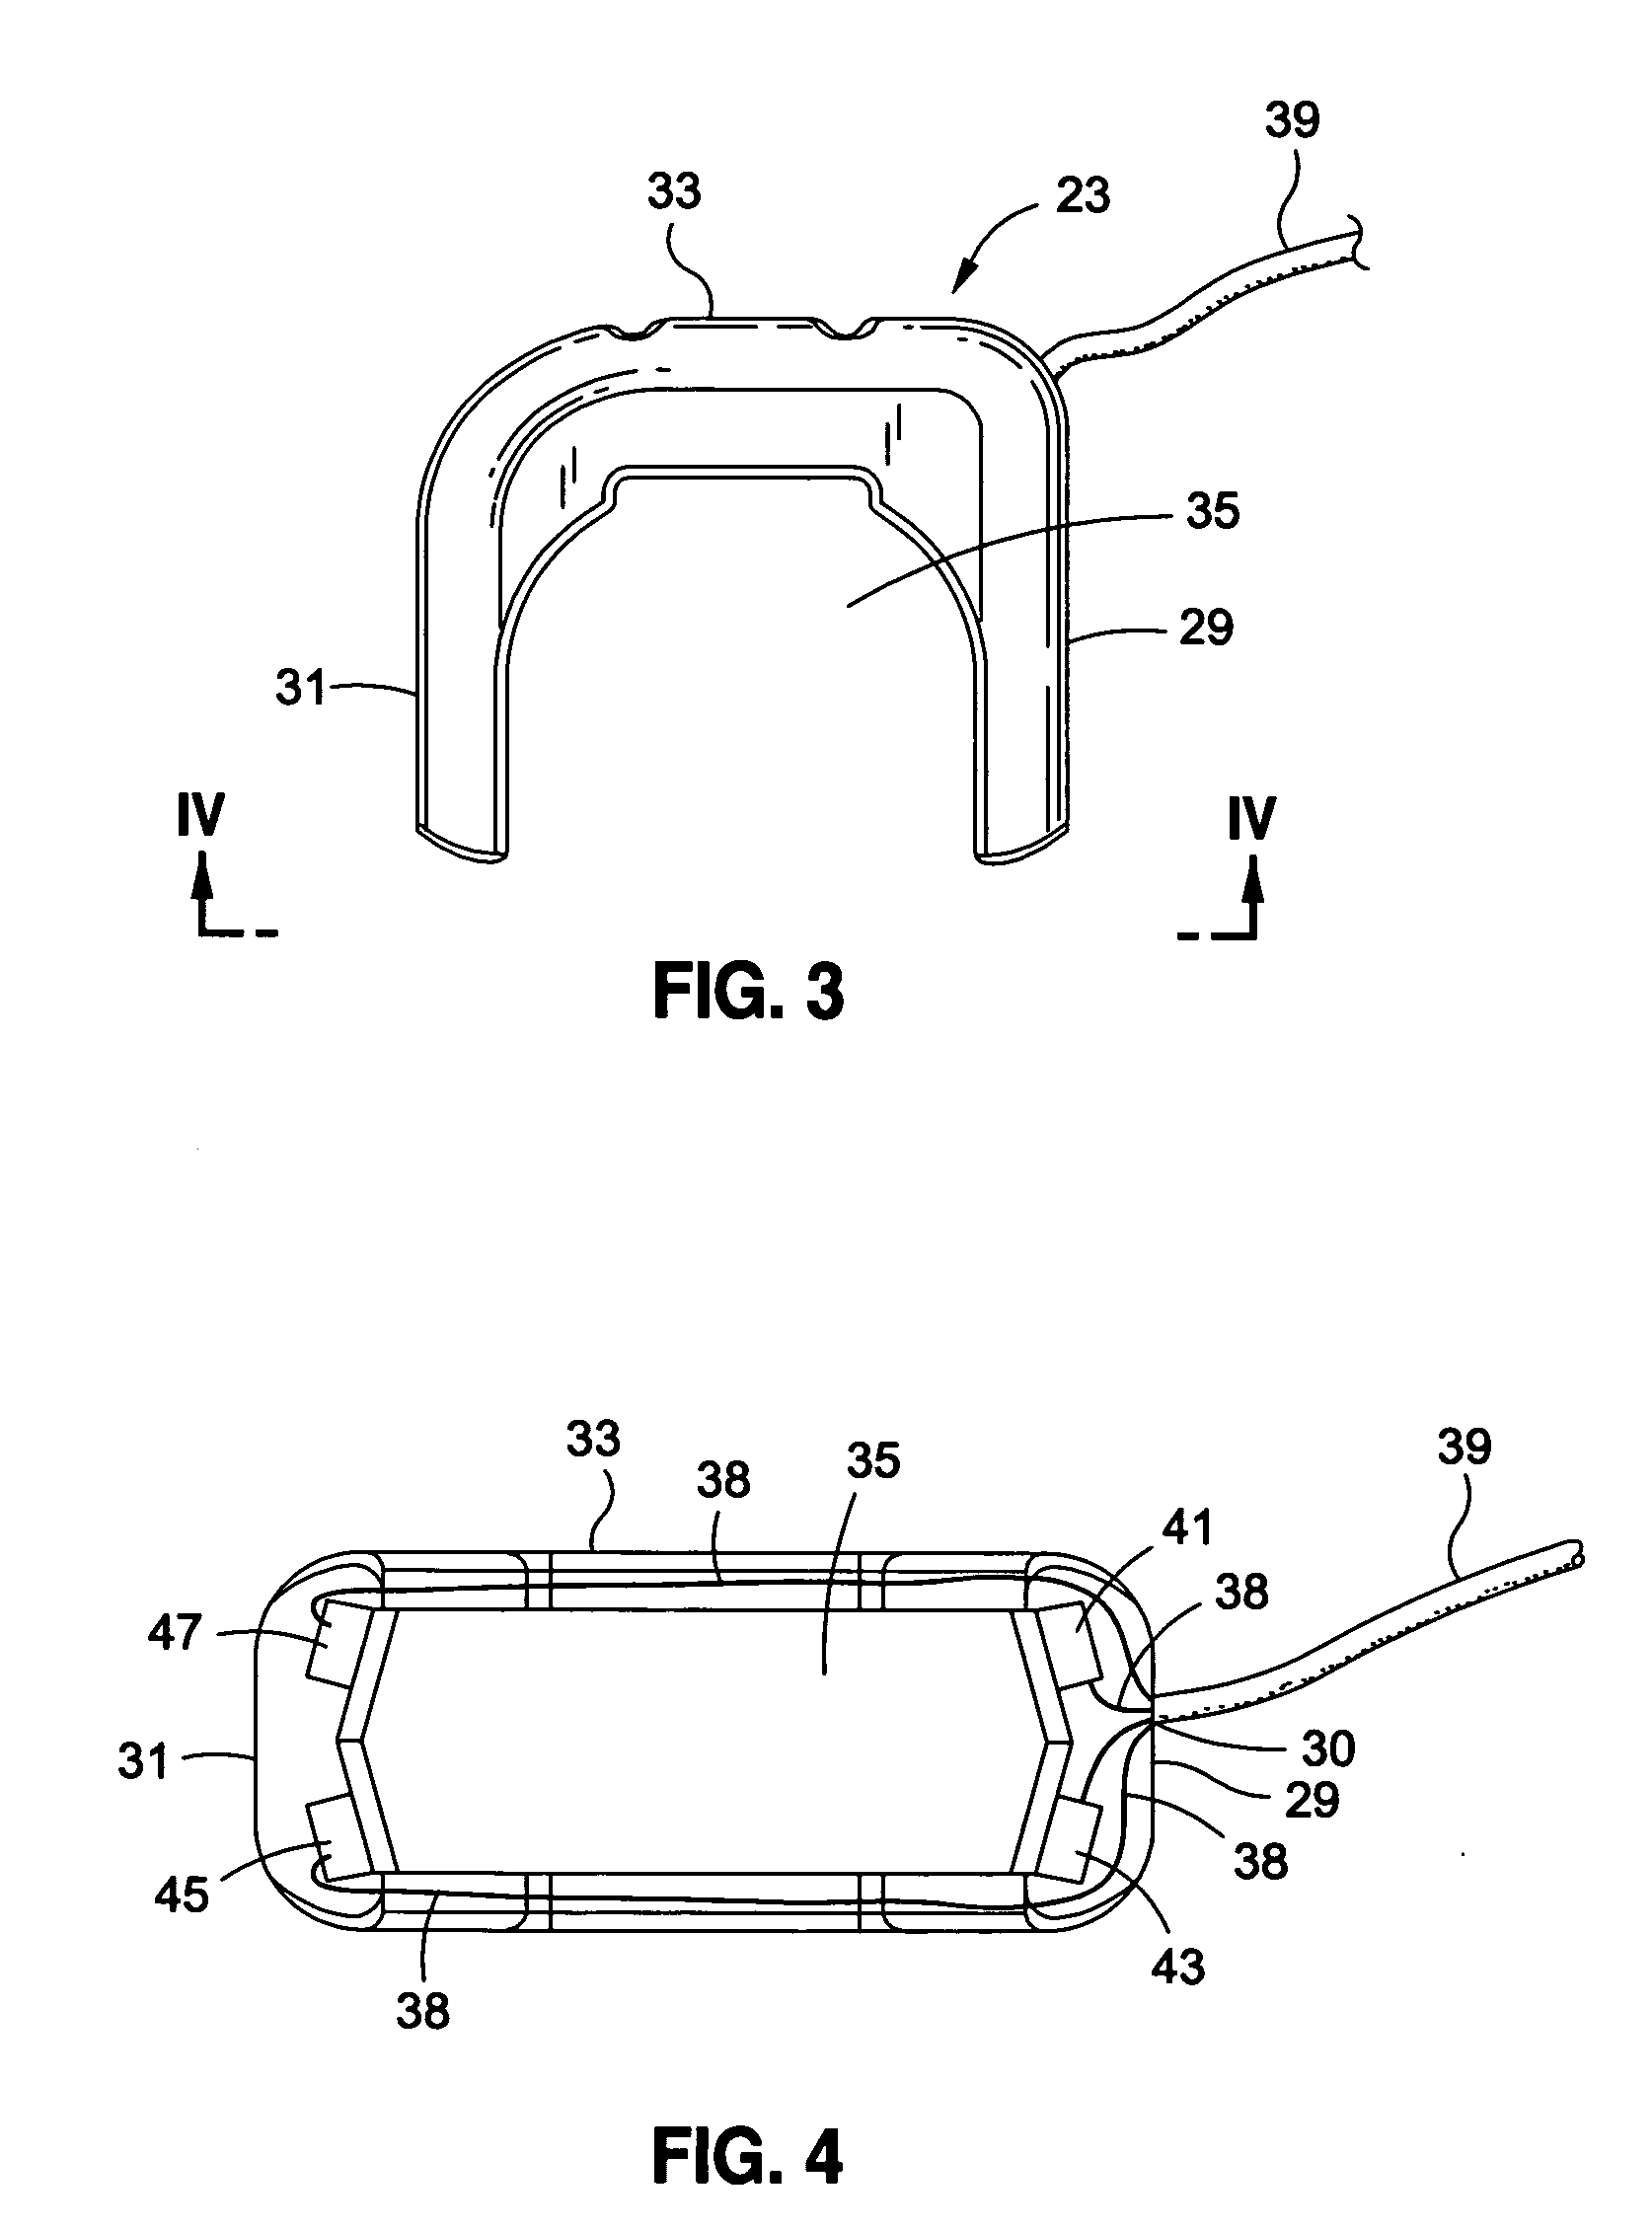 Acoustically compatible insert for an ultrasonic probe